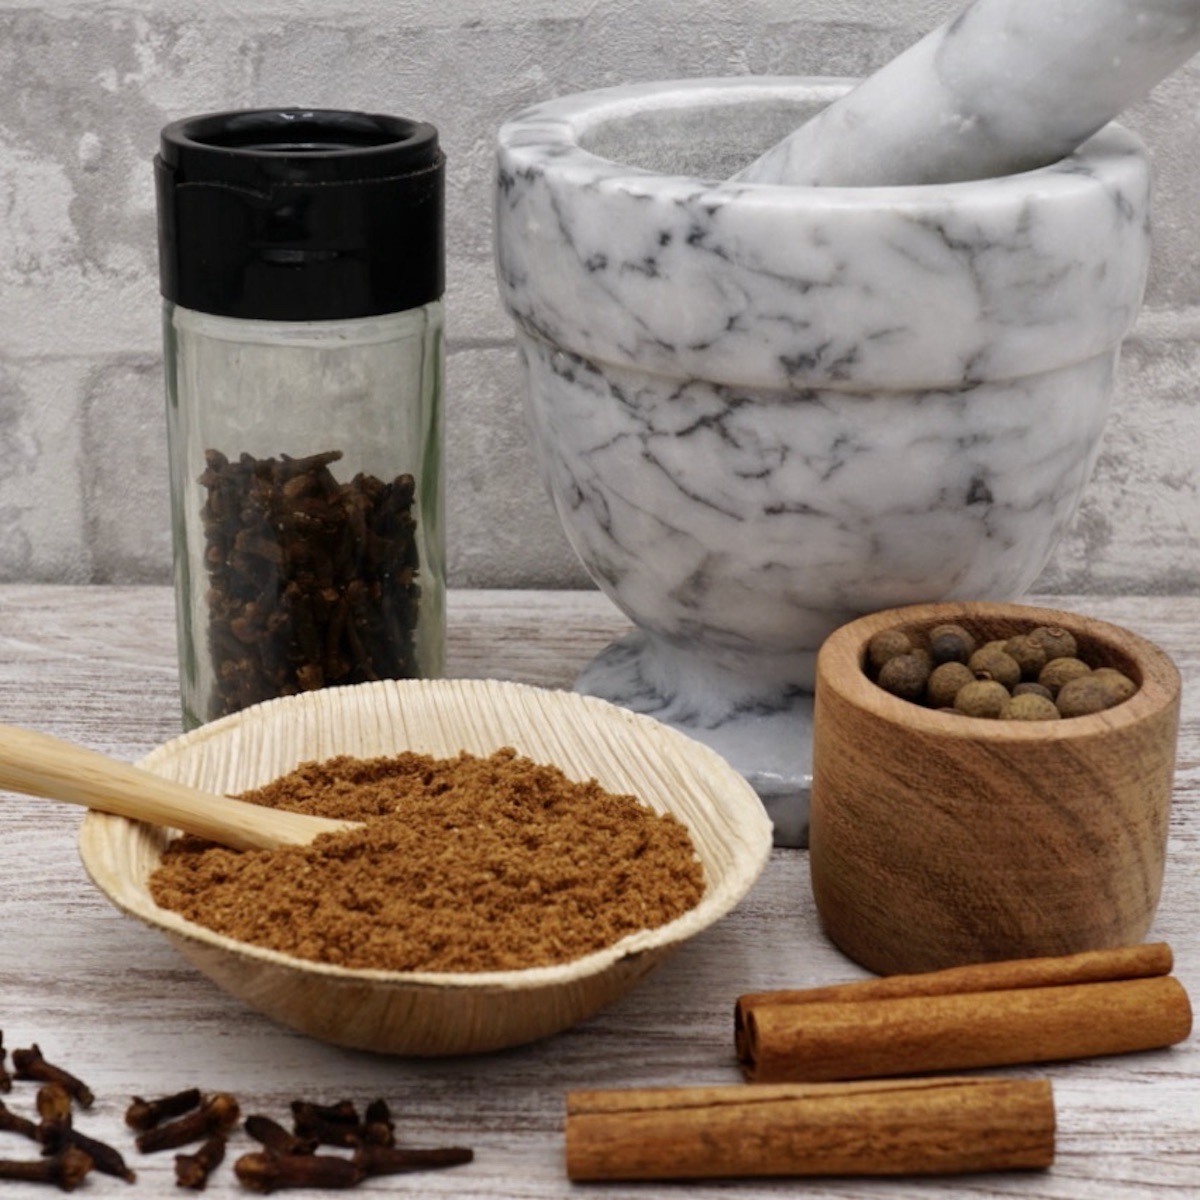 A bowl of mixed spice next to some whole spices and a marble pestle and mortar.